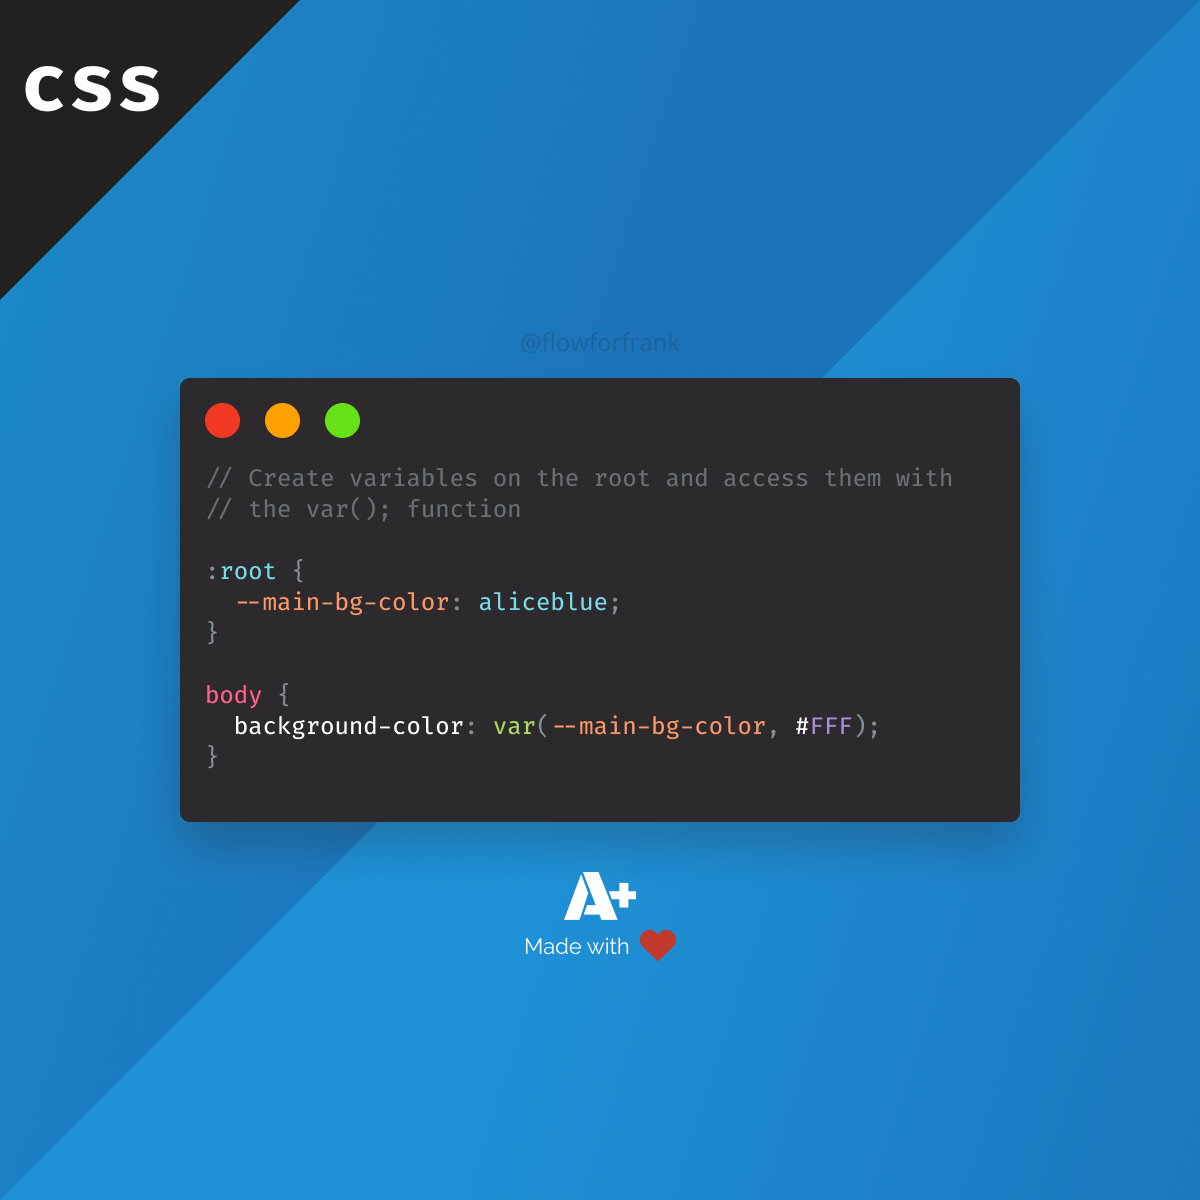 How to Use Variables in CSS